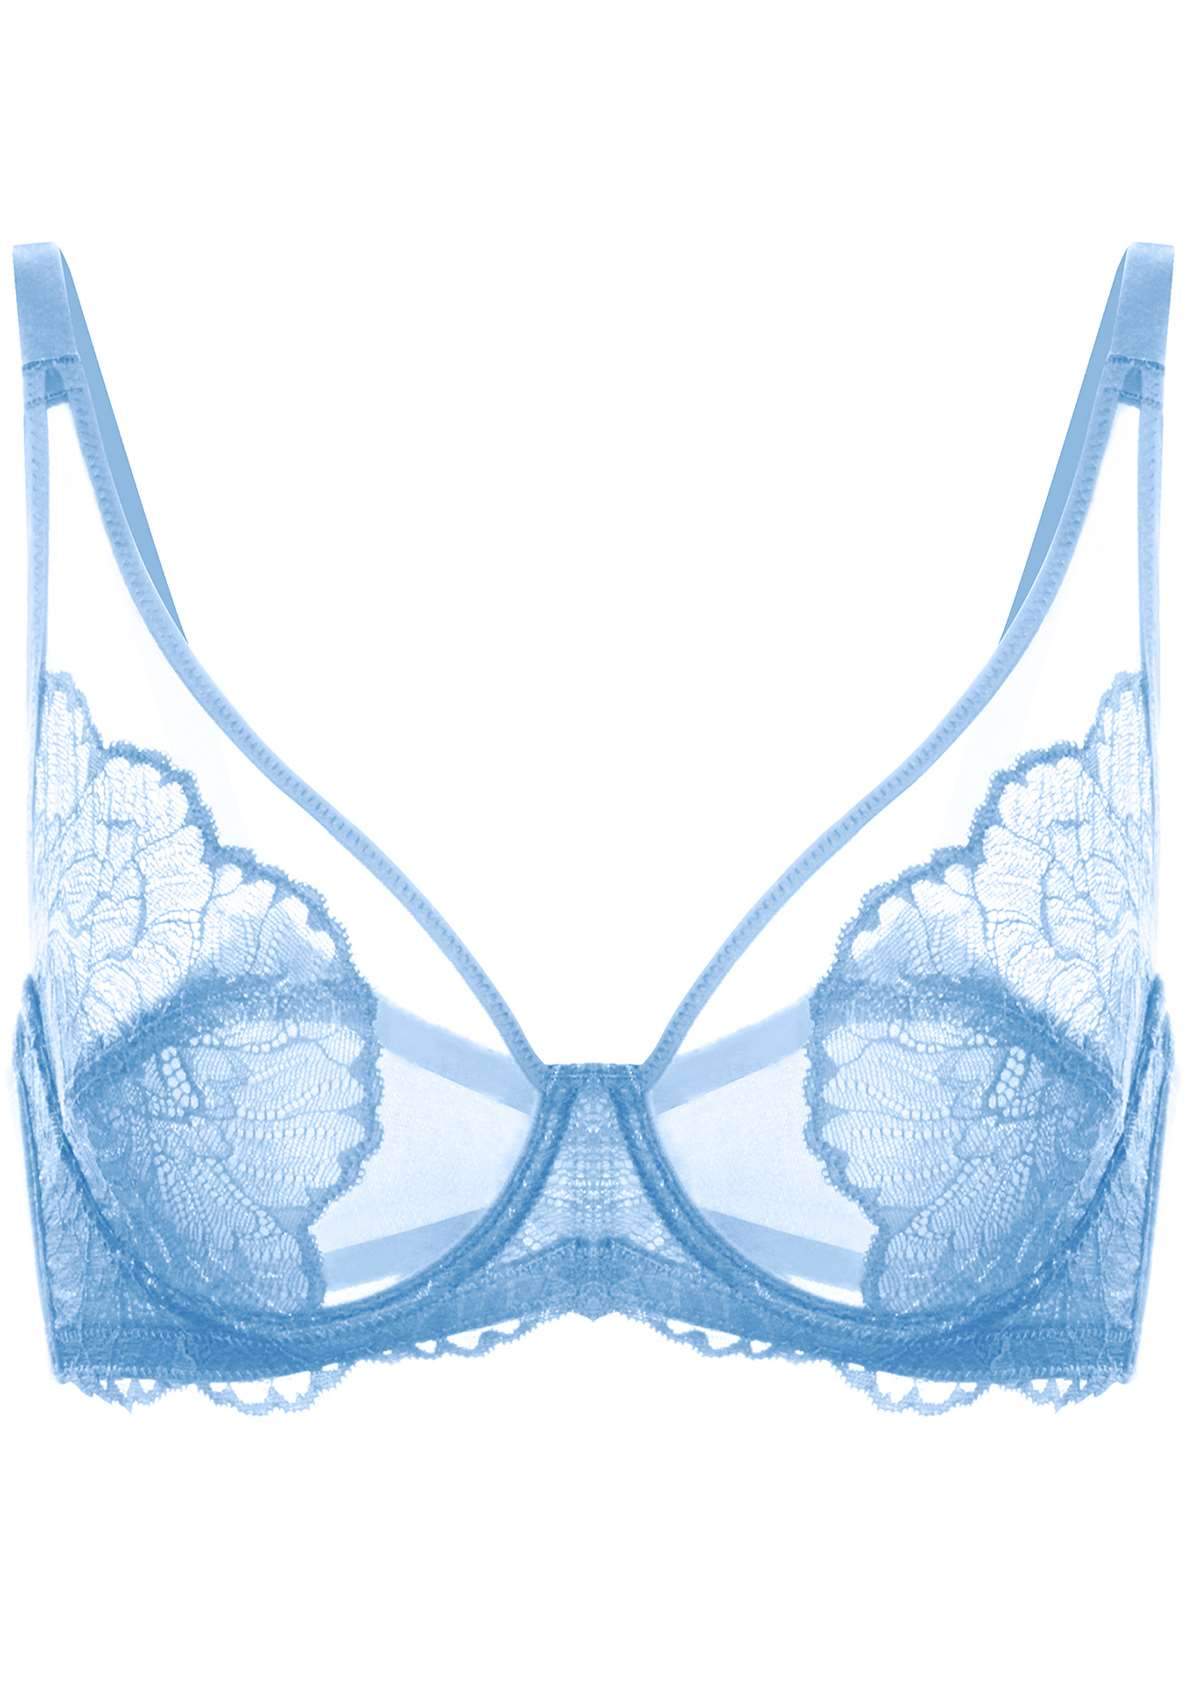 HSIA Blossom Full Coverage Supportive Unlined Underwire Bra Set - Storm Blue / 38 / DDD/F